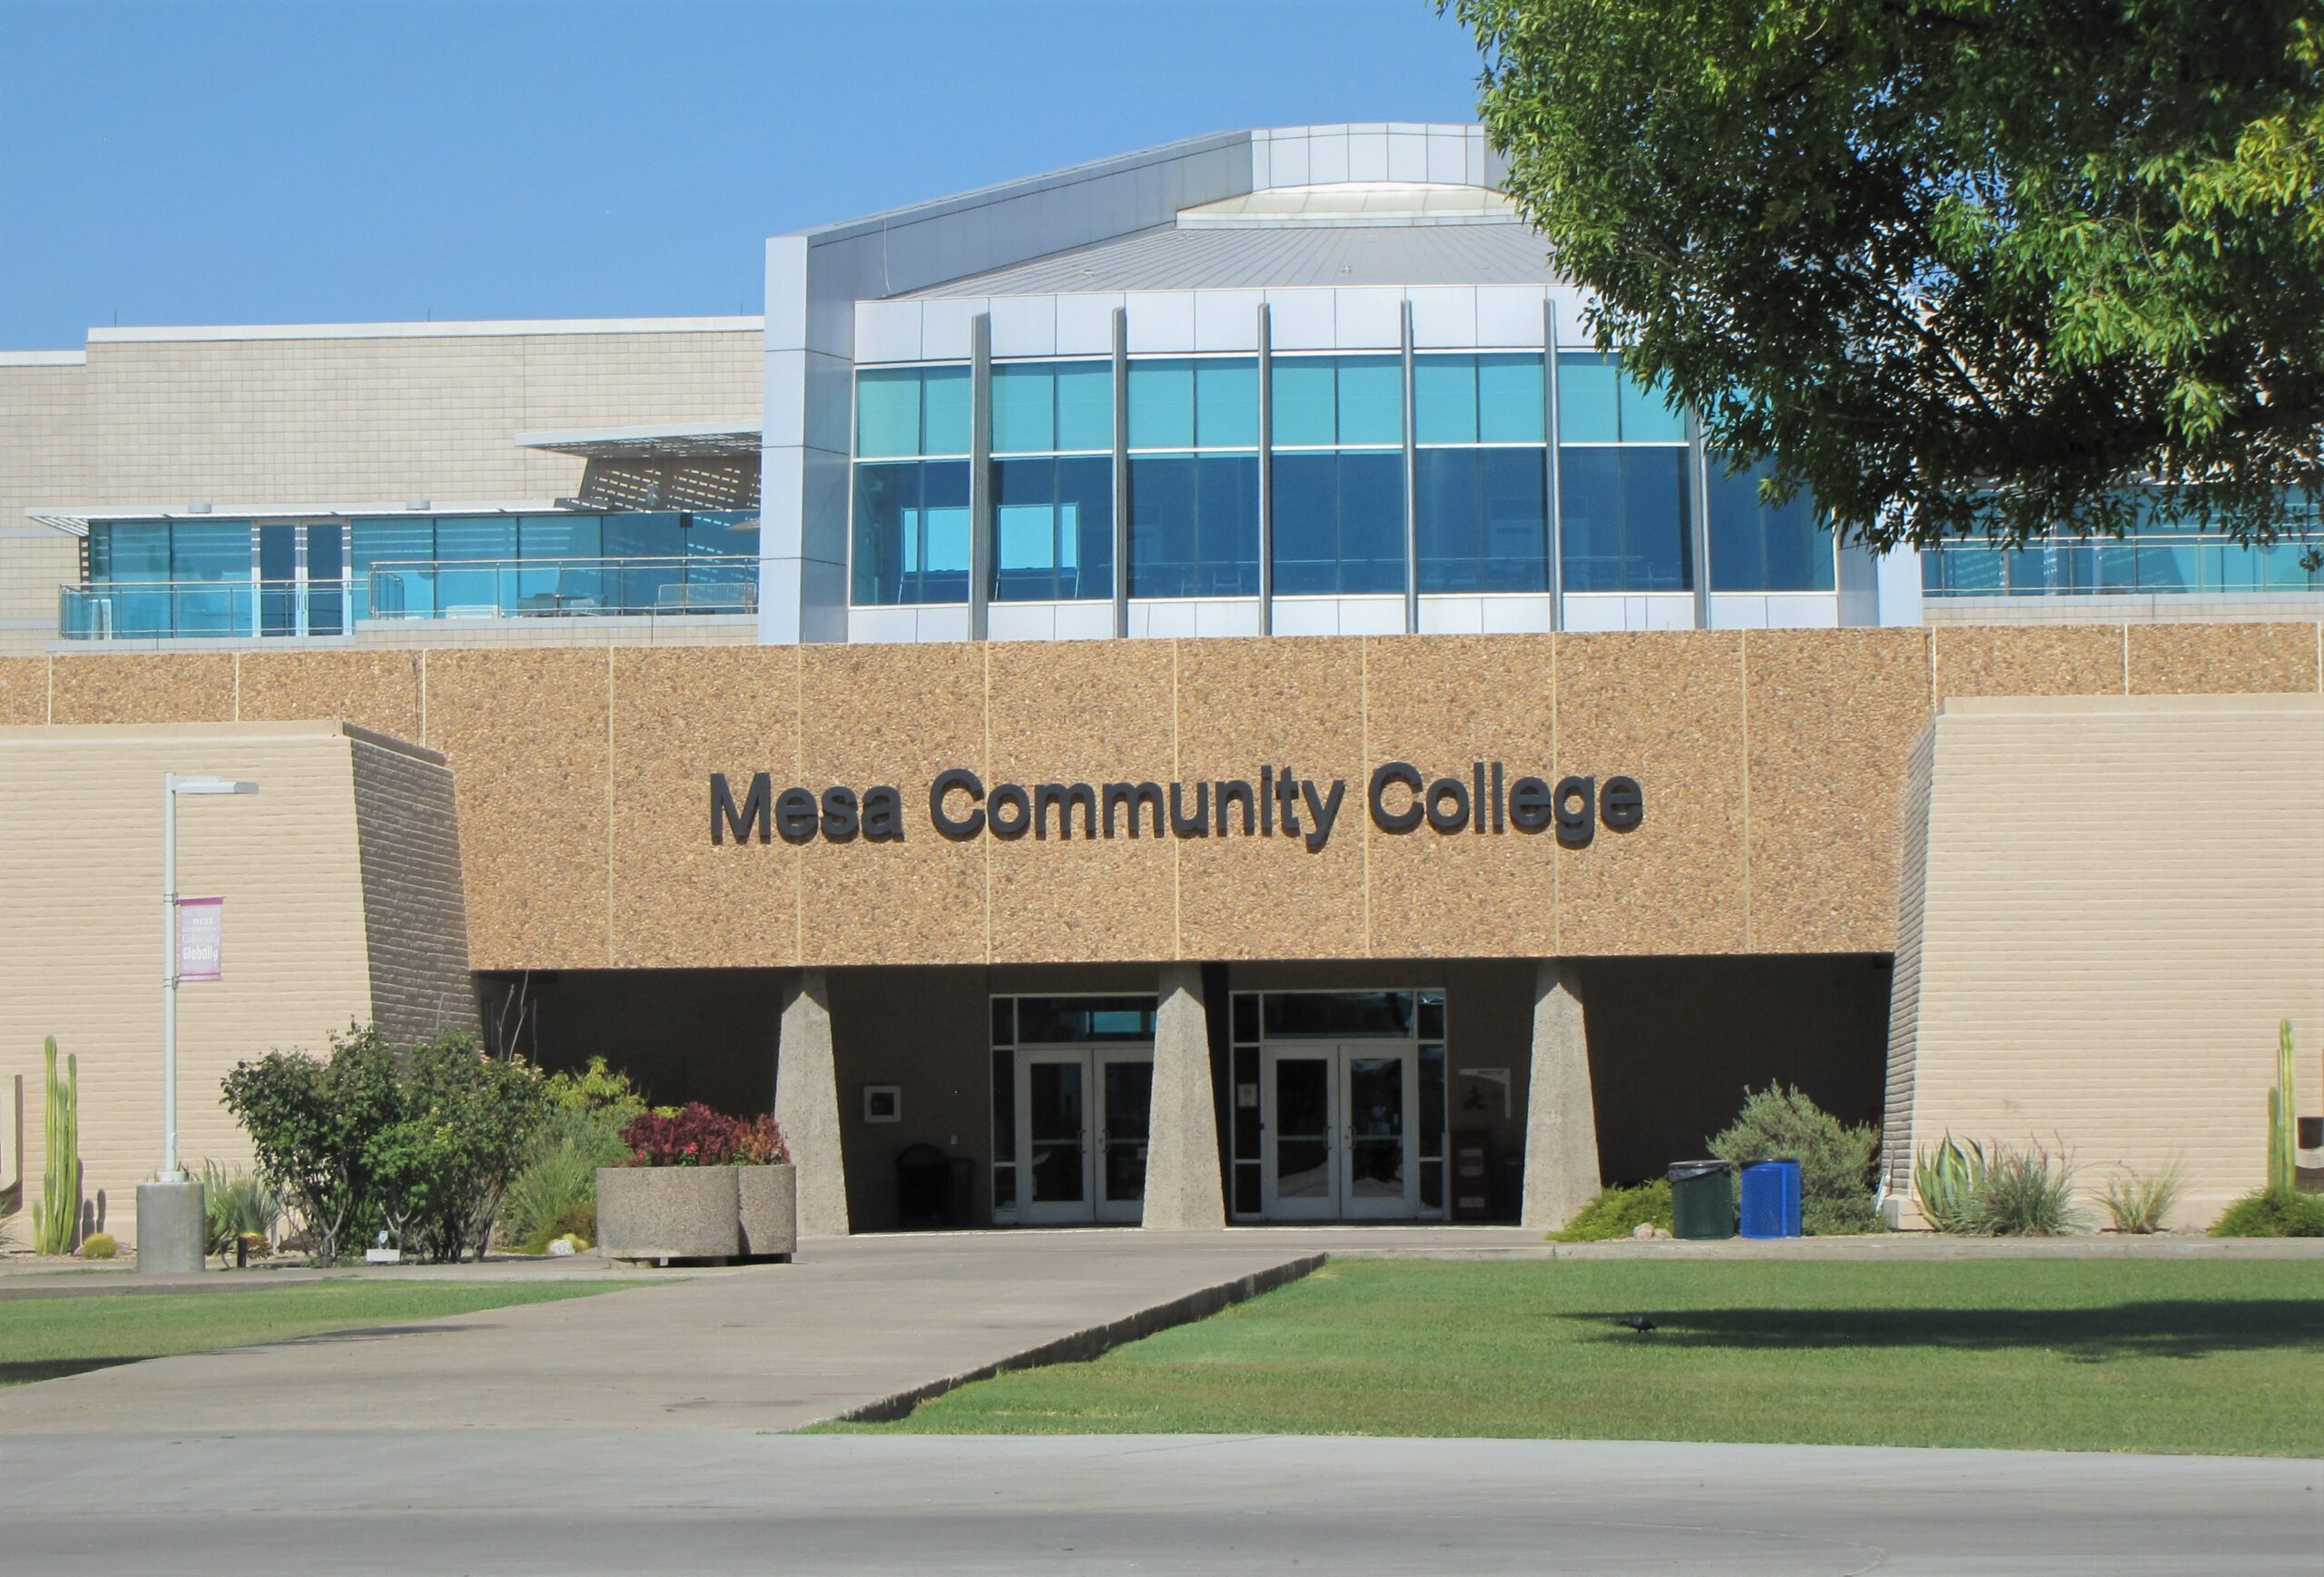 Mesa Community College Fitness Centers offer memberships for all students and community members